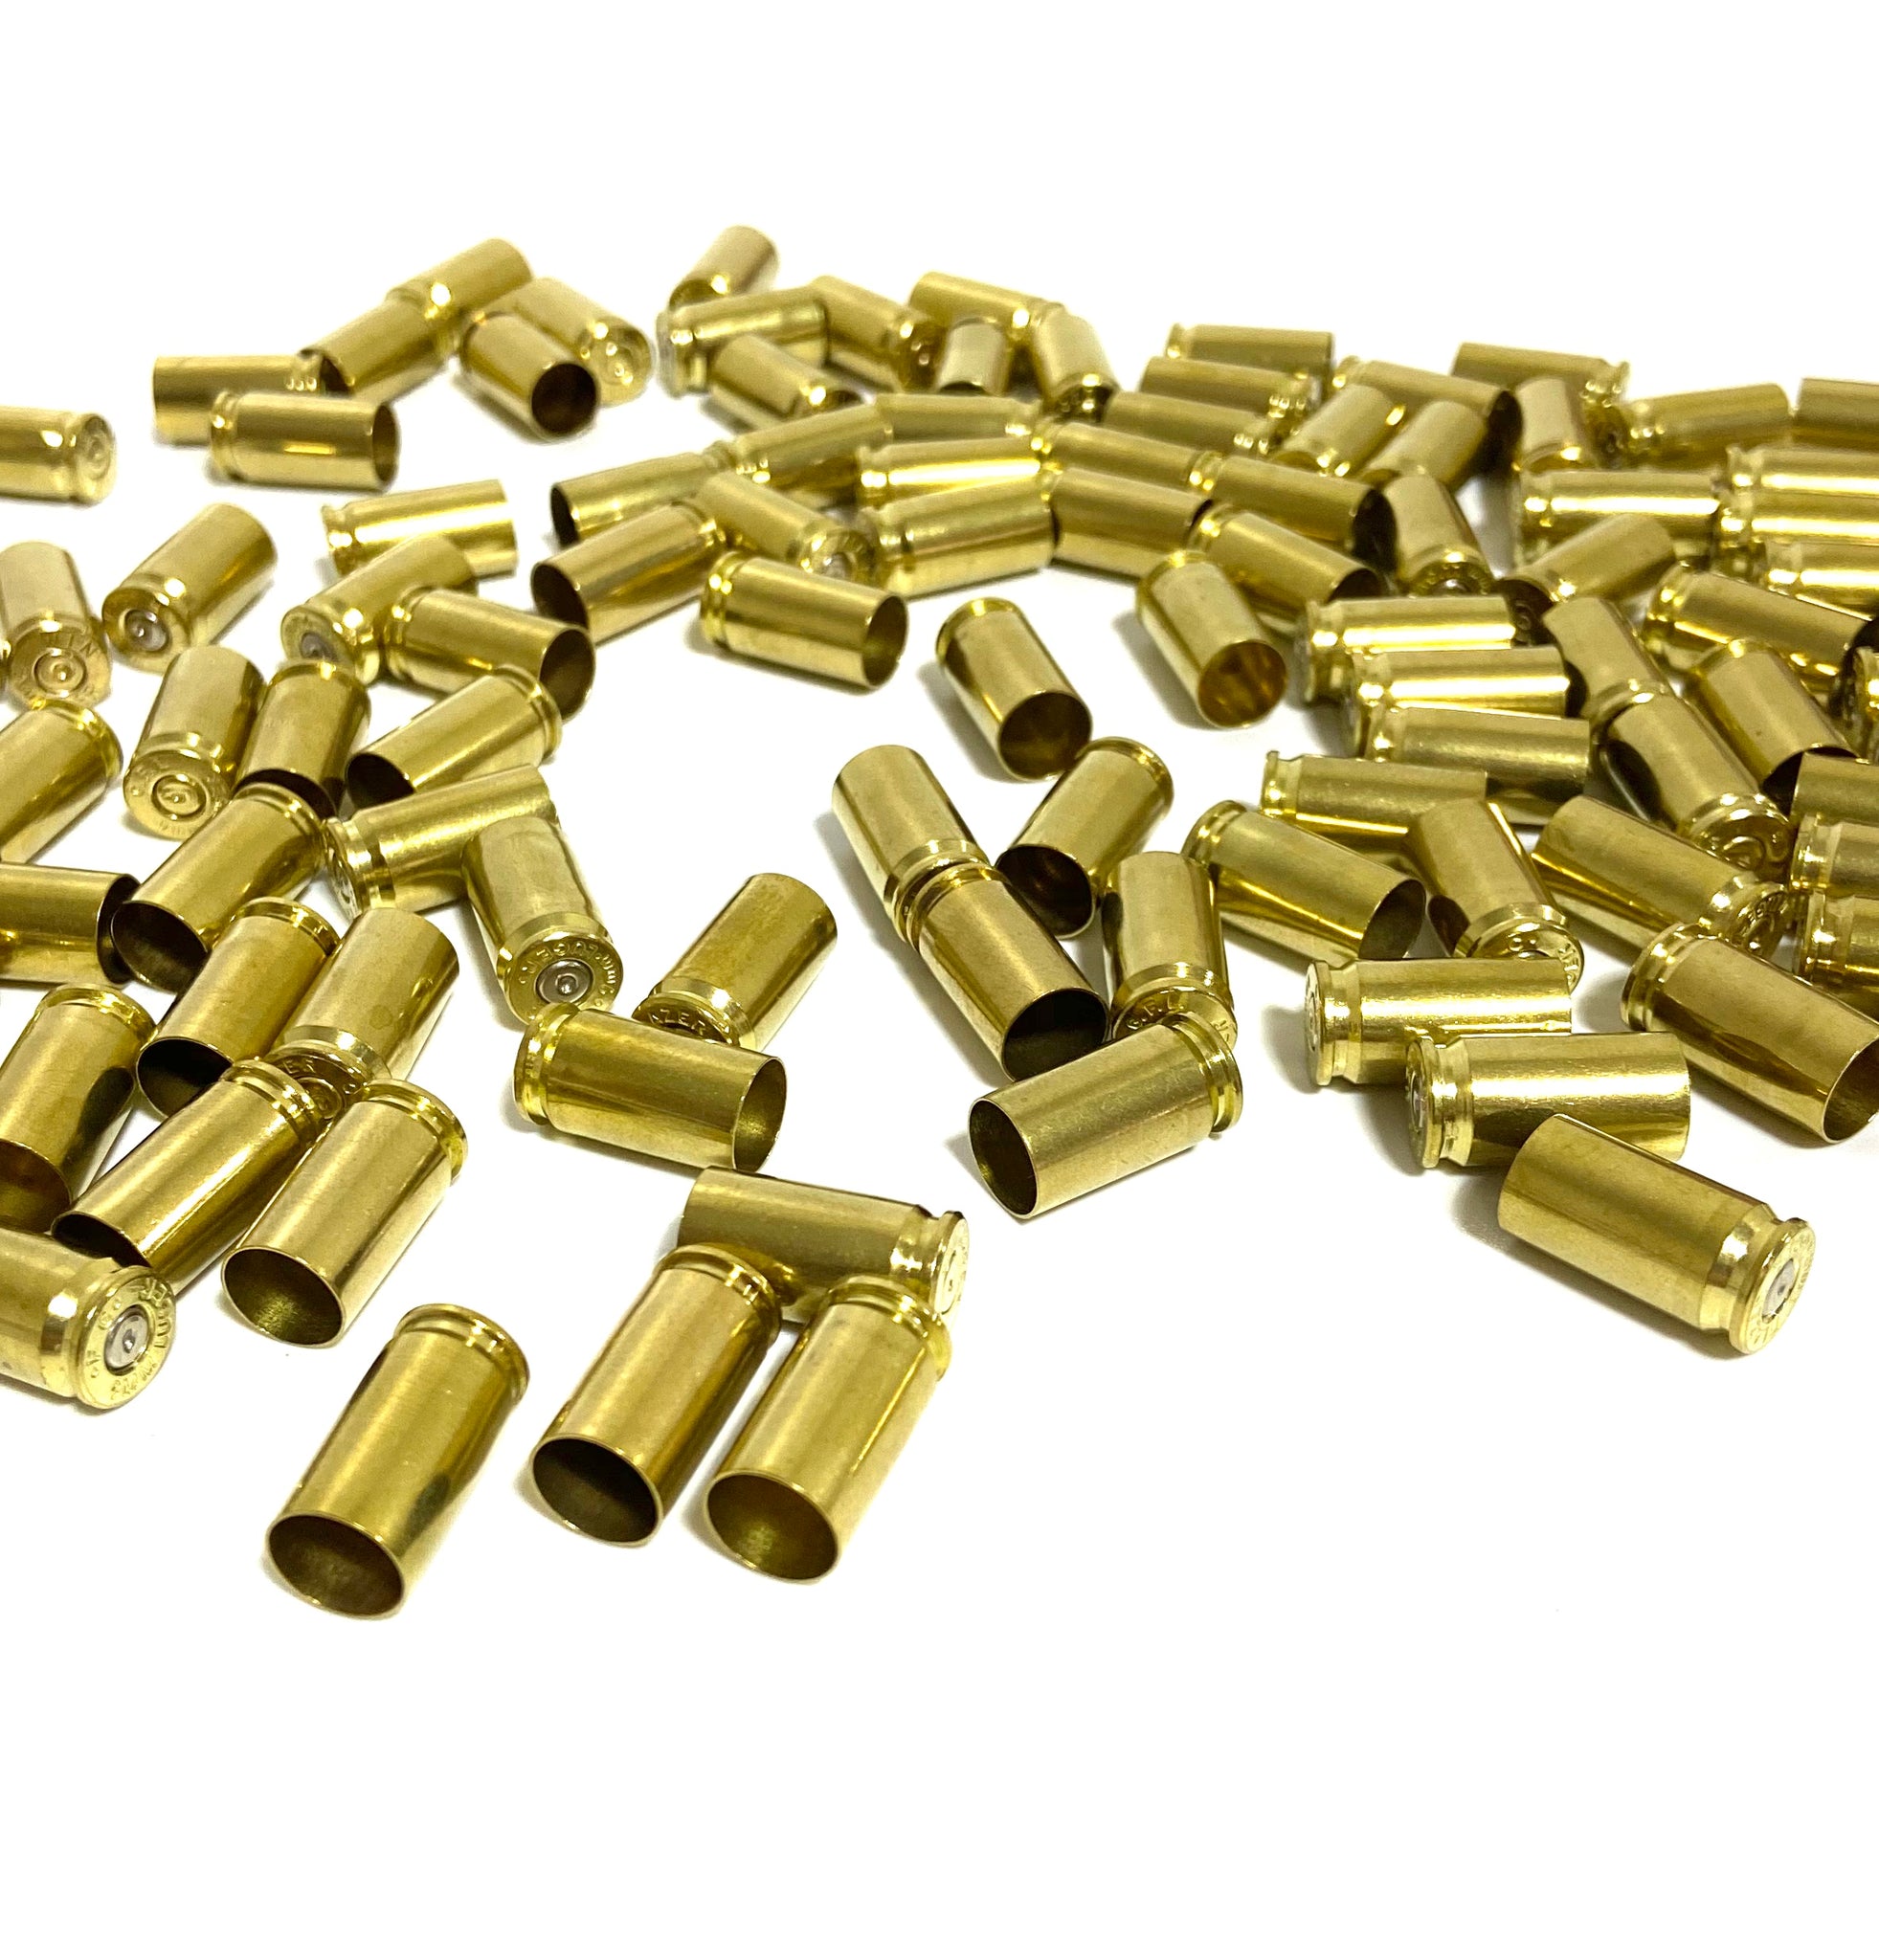 9MM Brass Shells Polished Empty Used Casings Luger 9X19 DIY Bullet